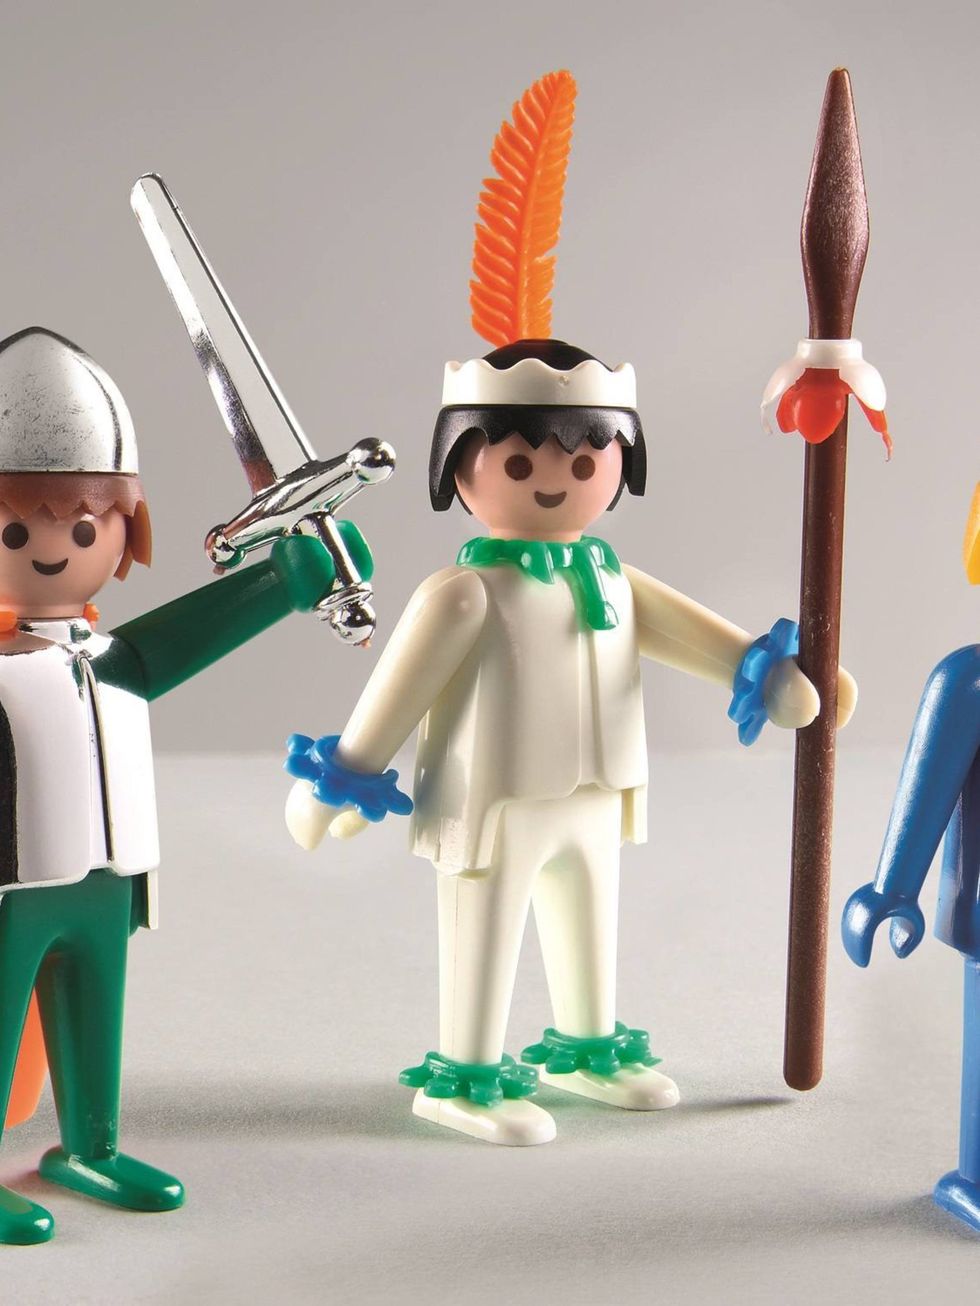 Standing, Costume accessory, Toy, Uniform, Costume hat, Gesture, Fictional character, Animation, Lego, 